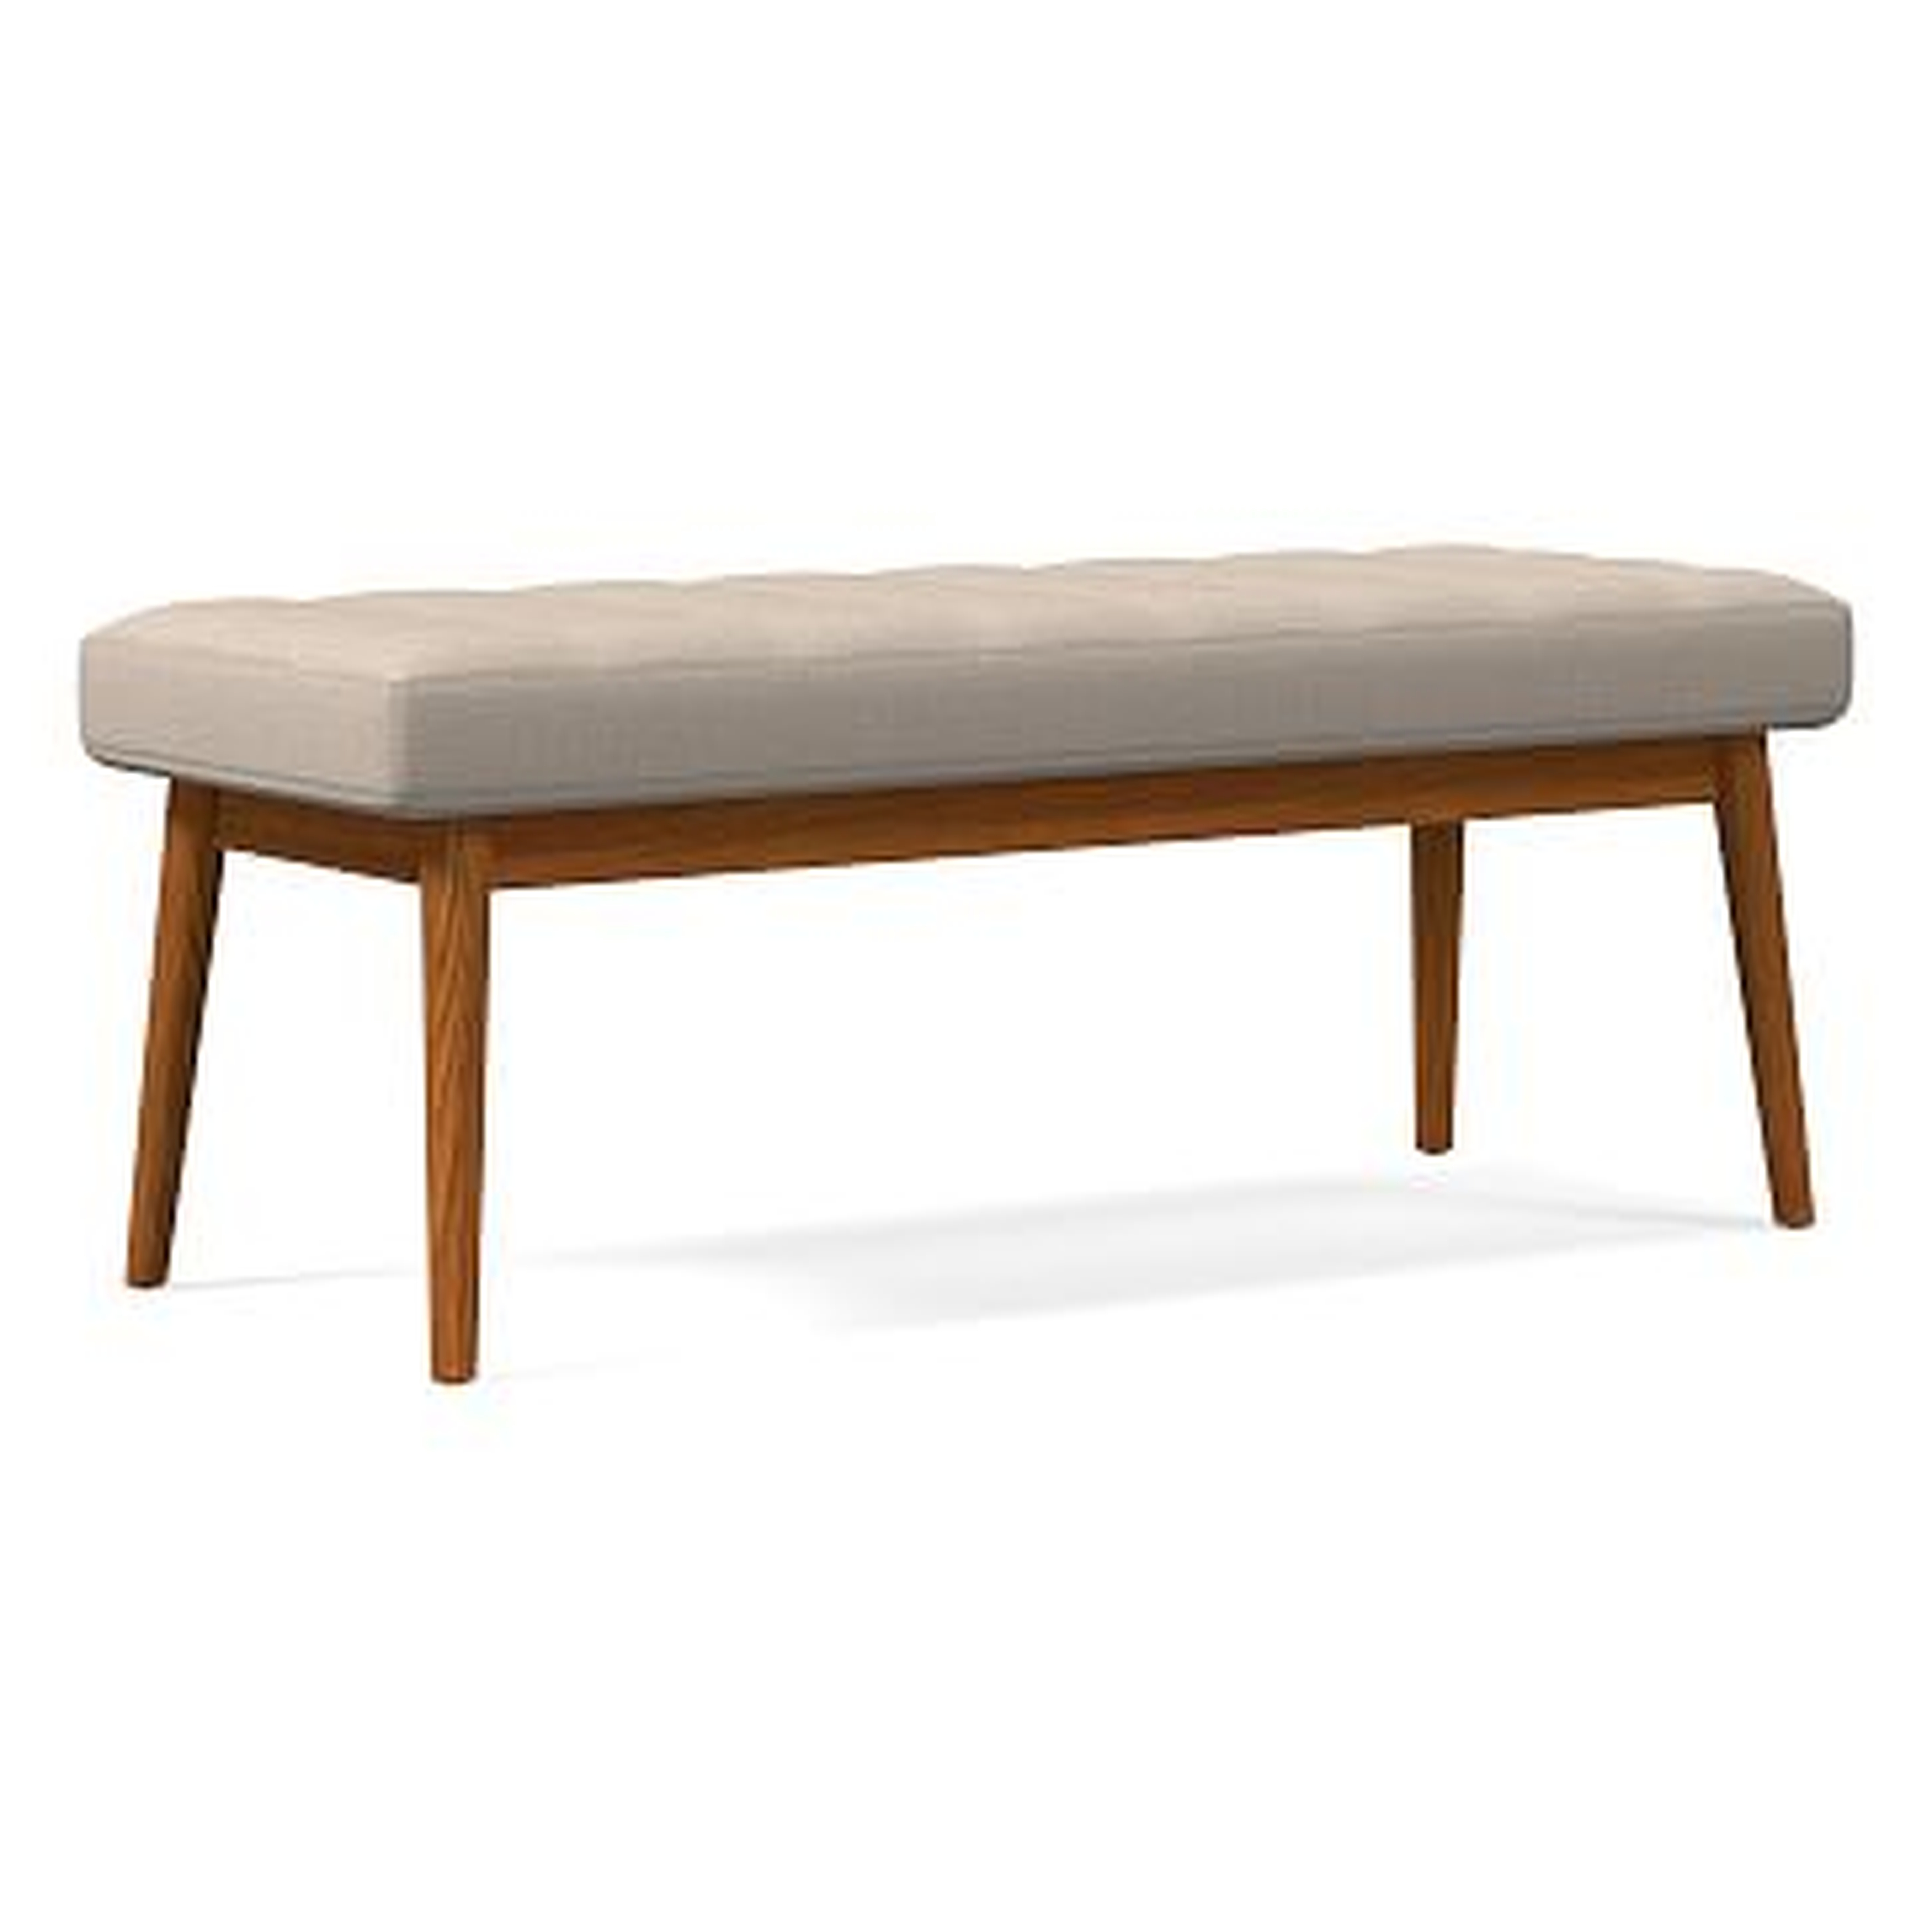 Midcentury Upholstered Bench, Poly, Yarn Dyed Linen Weave, Sand, Acorn - West Elm